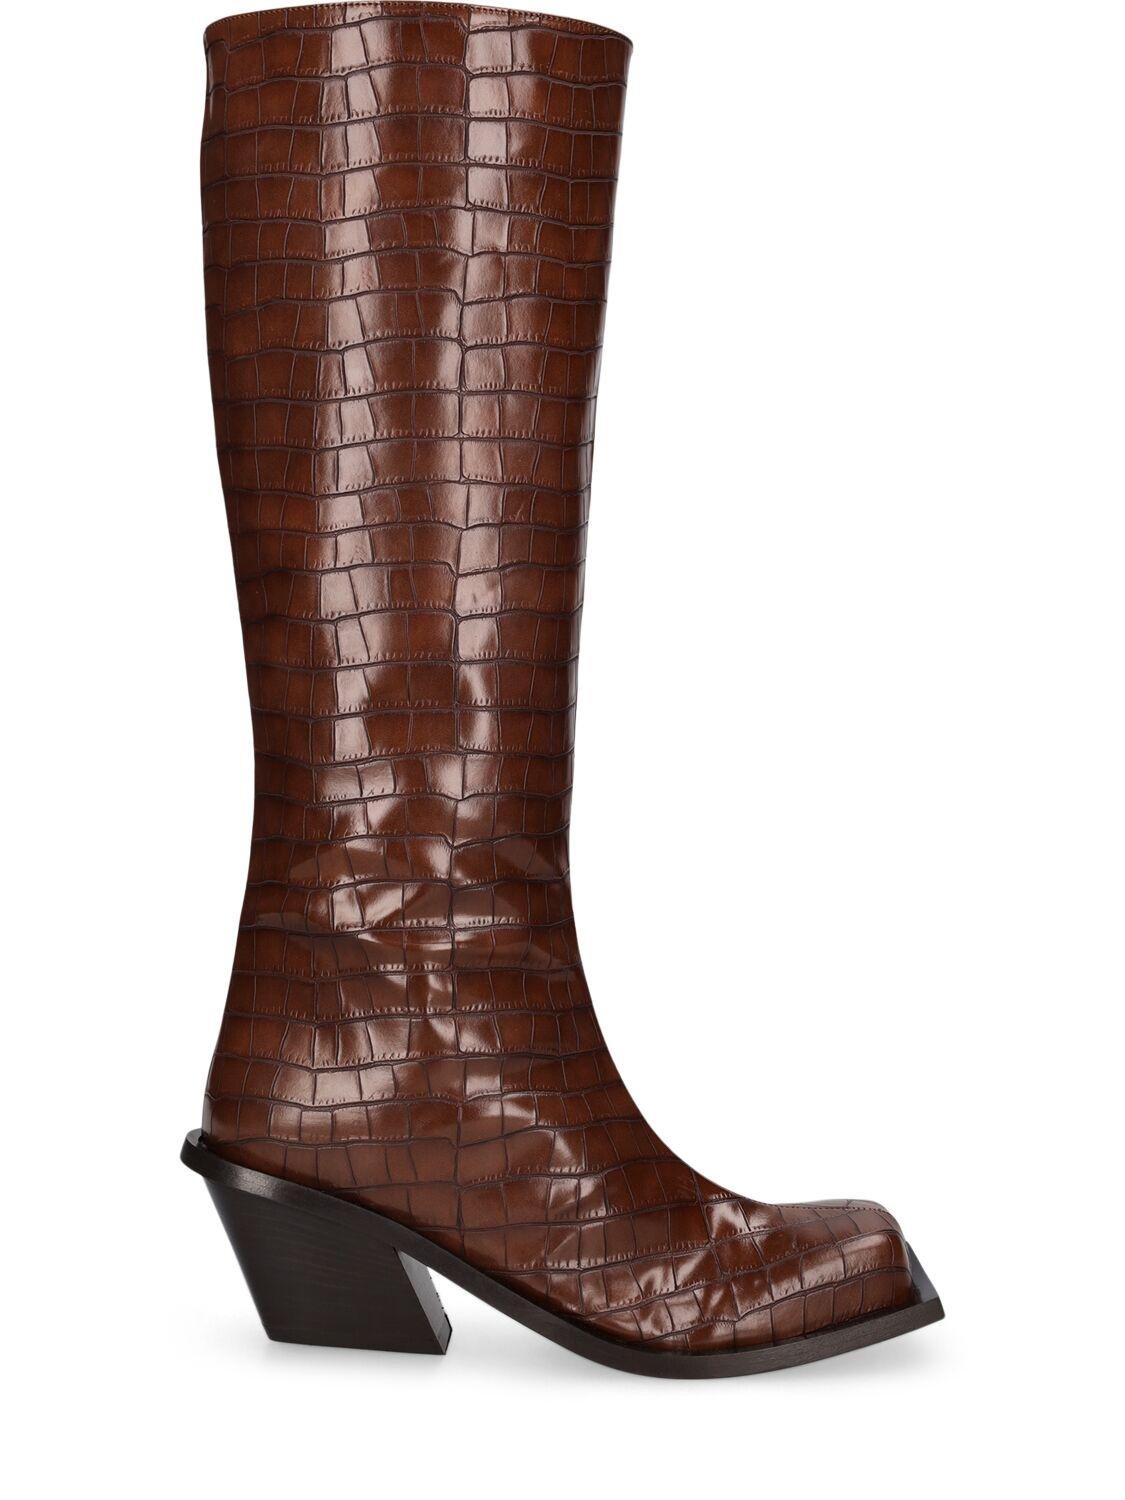 60mm Blondine Faux Leather Cowboy Boots by GIA BORGHINI